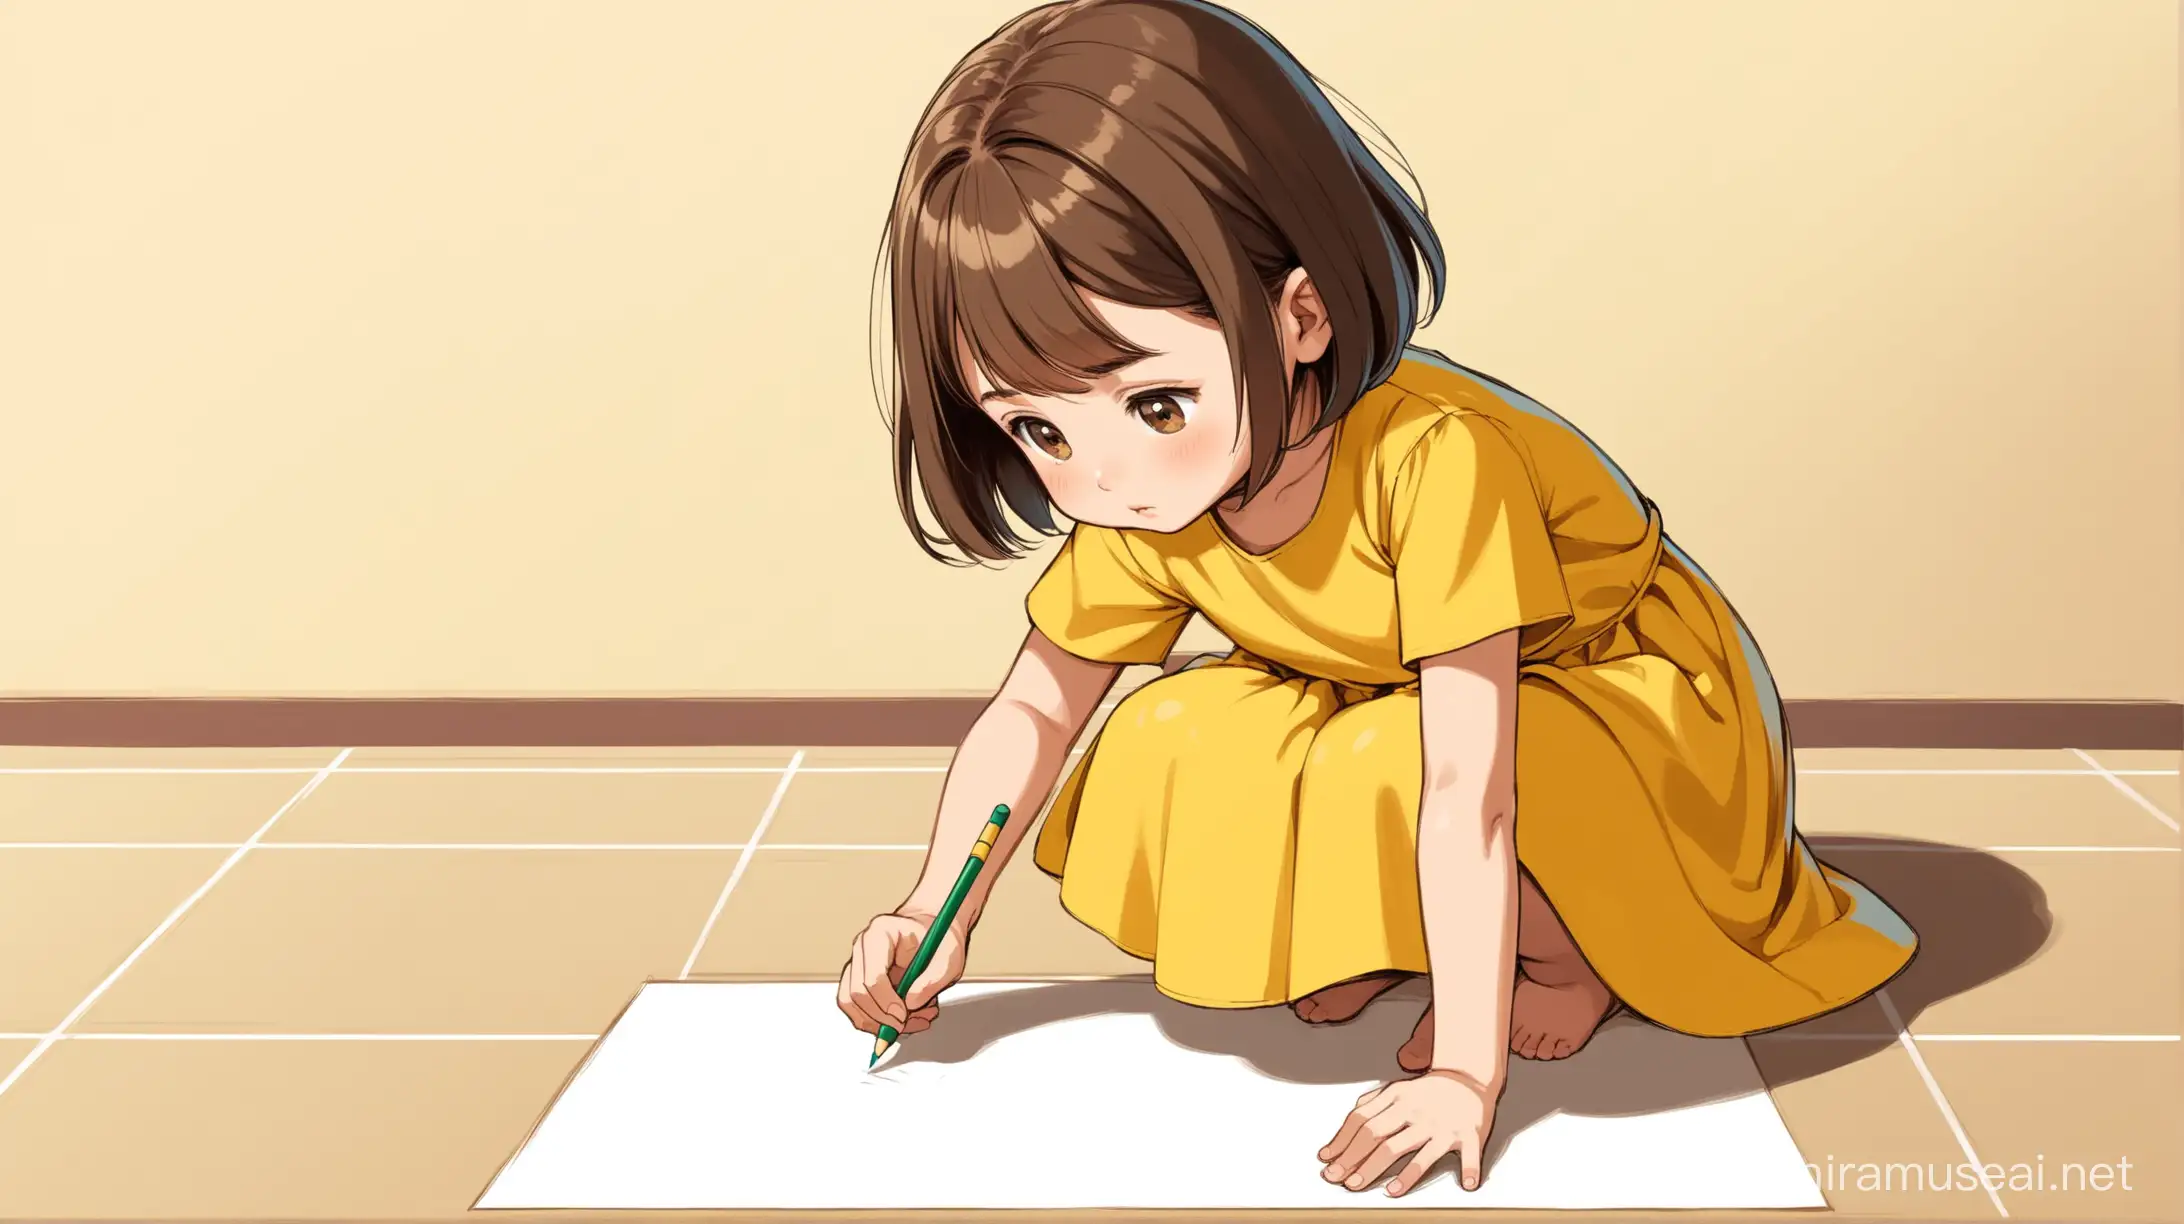  A female kid have a 5 years old , medium light skin, dark brown small eyes, very very short brown hair, yellow dress, she is sitting down on the floor and drawing in the floor while looking down into the floor. cartoon type
